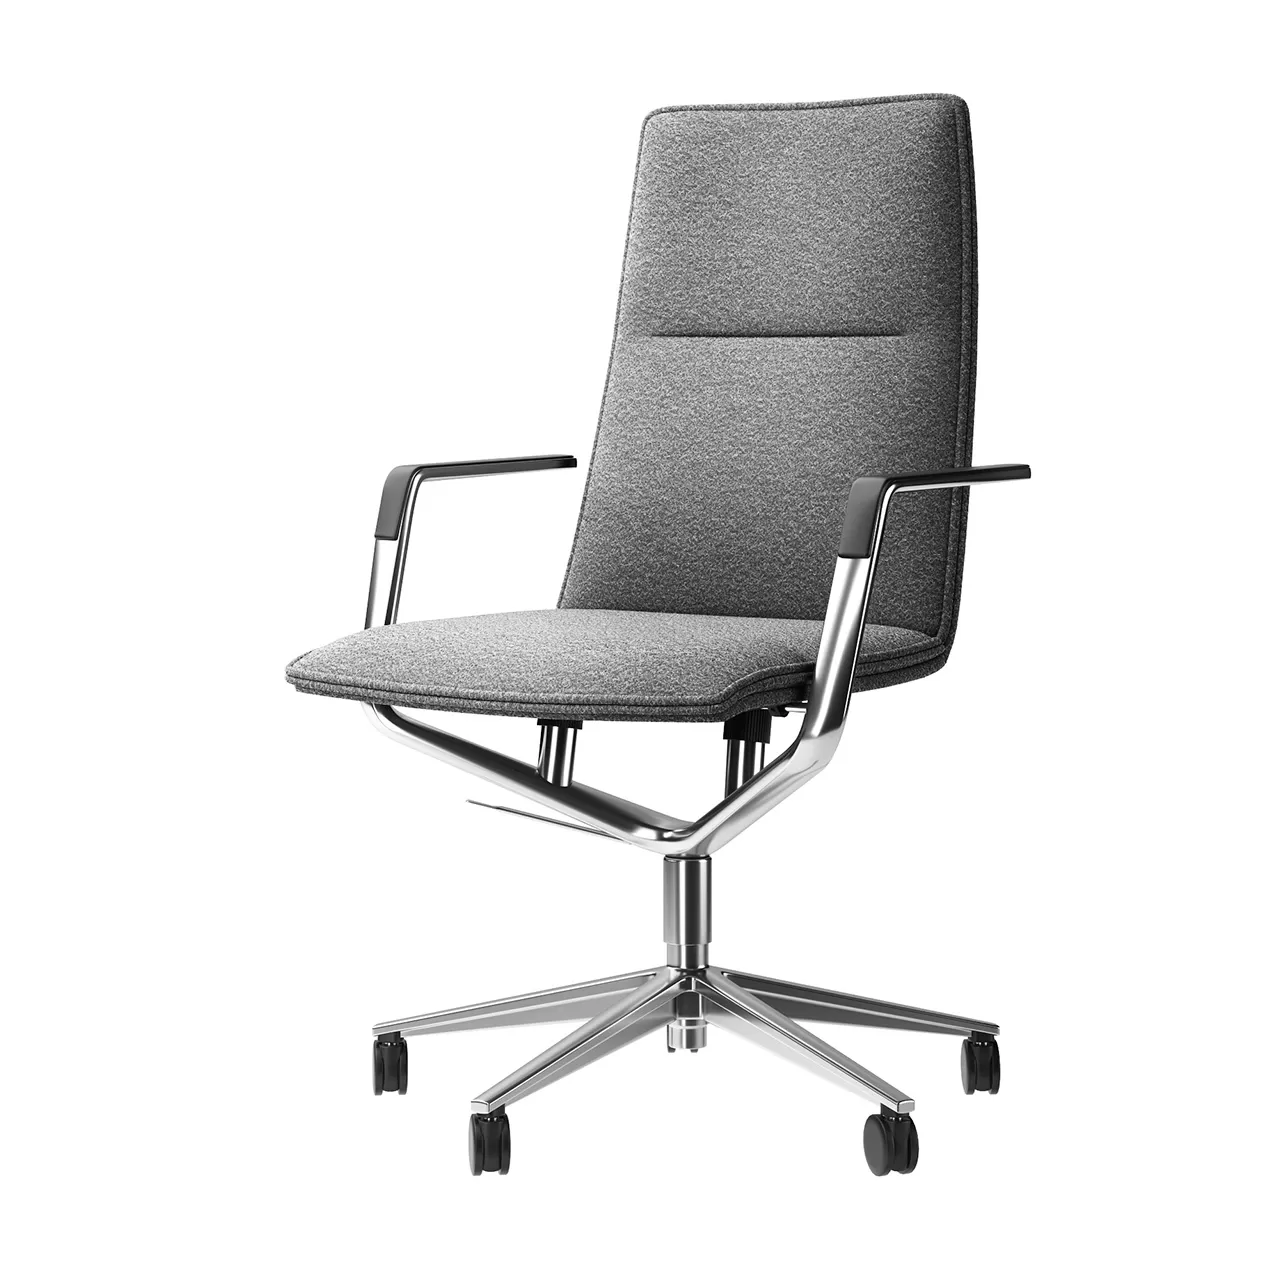 Office – office-chair-sola-291-polished-by-wilkhahn